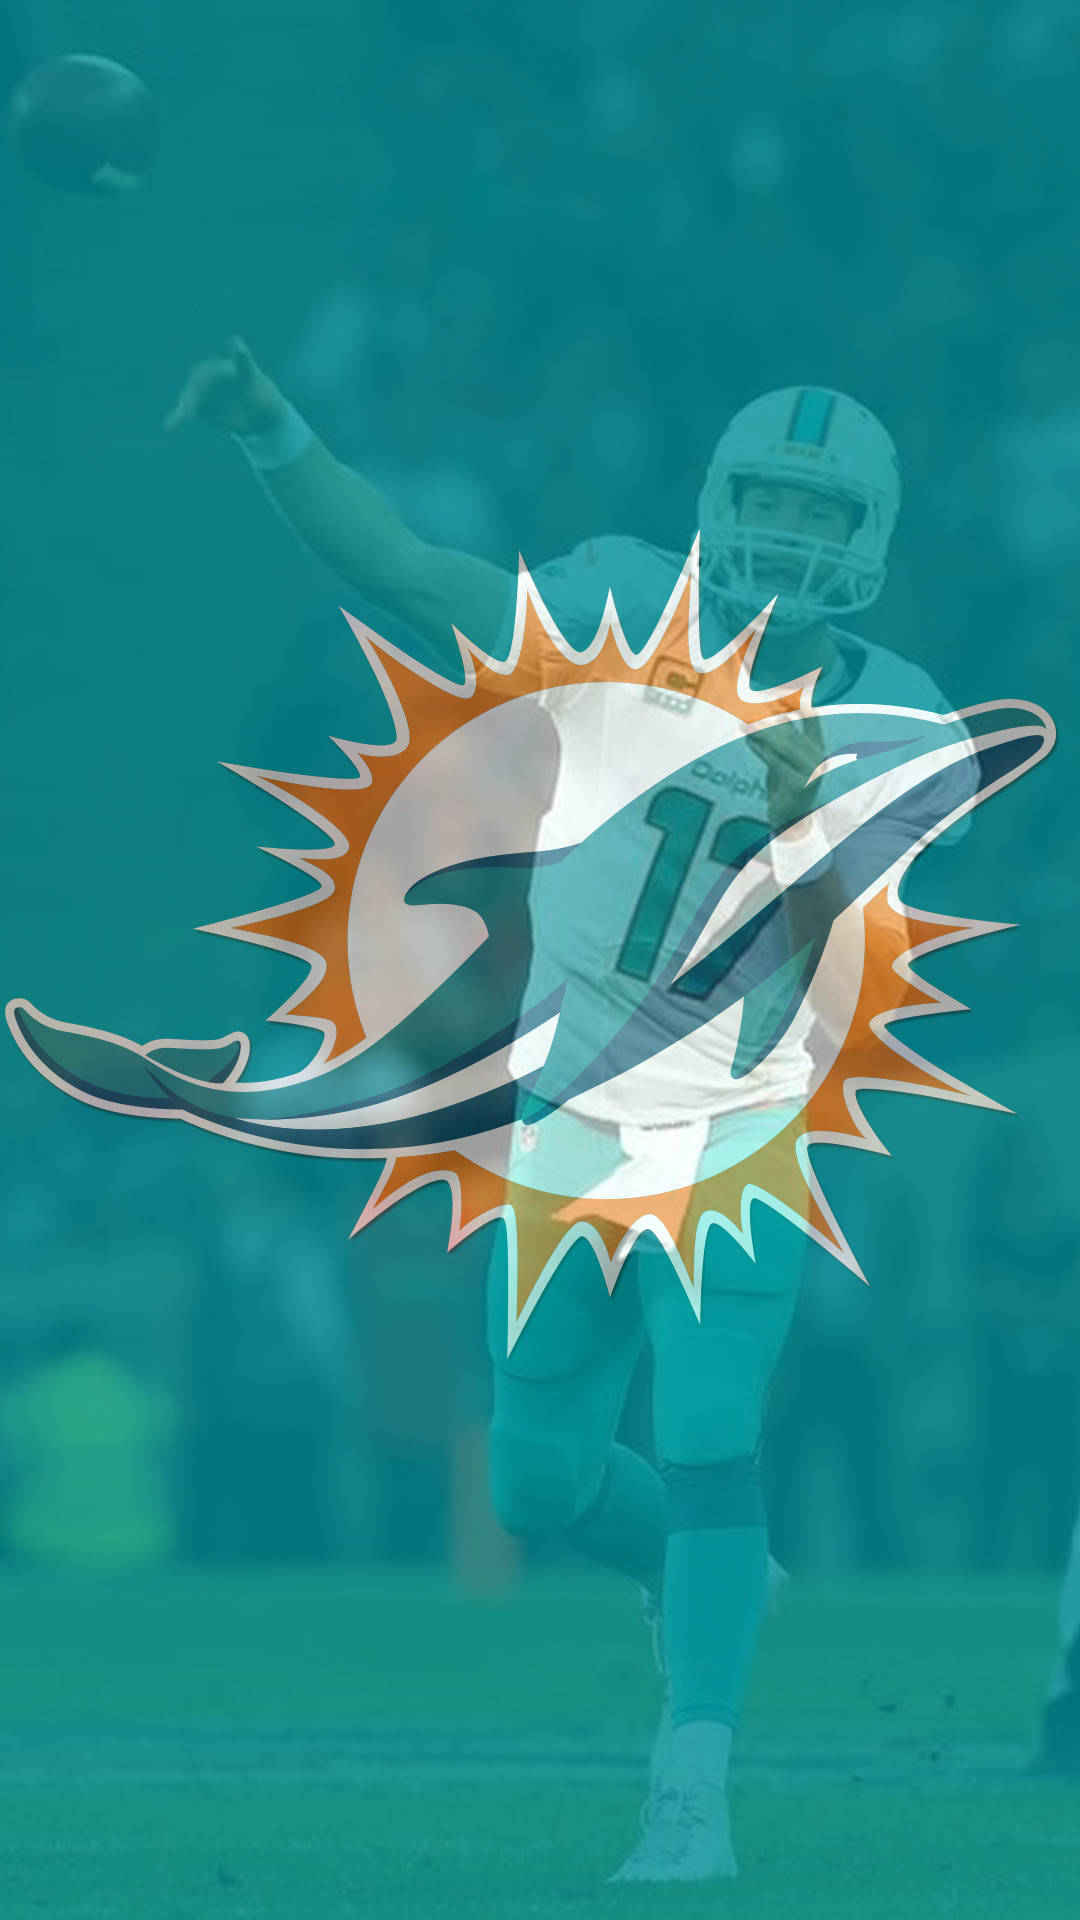 Get your Miami Dolphins pride on your phone with a Miami Dolphins iPhone Wallpaper